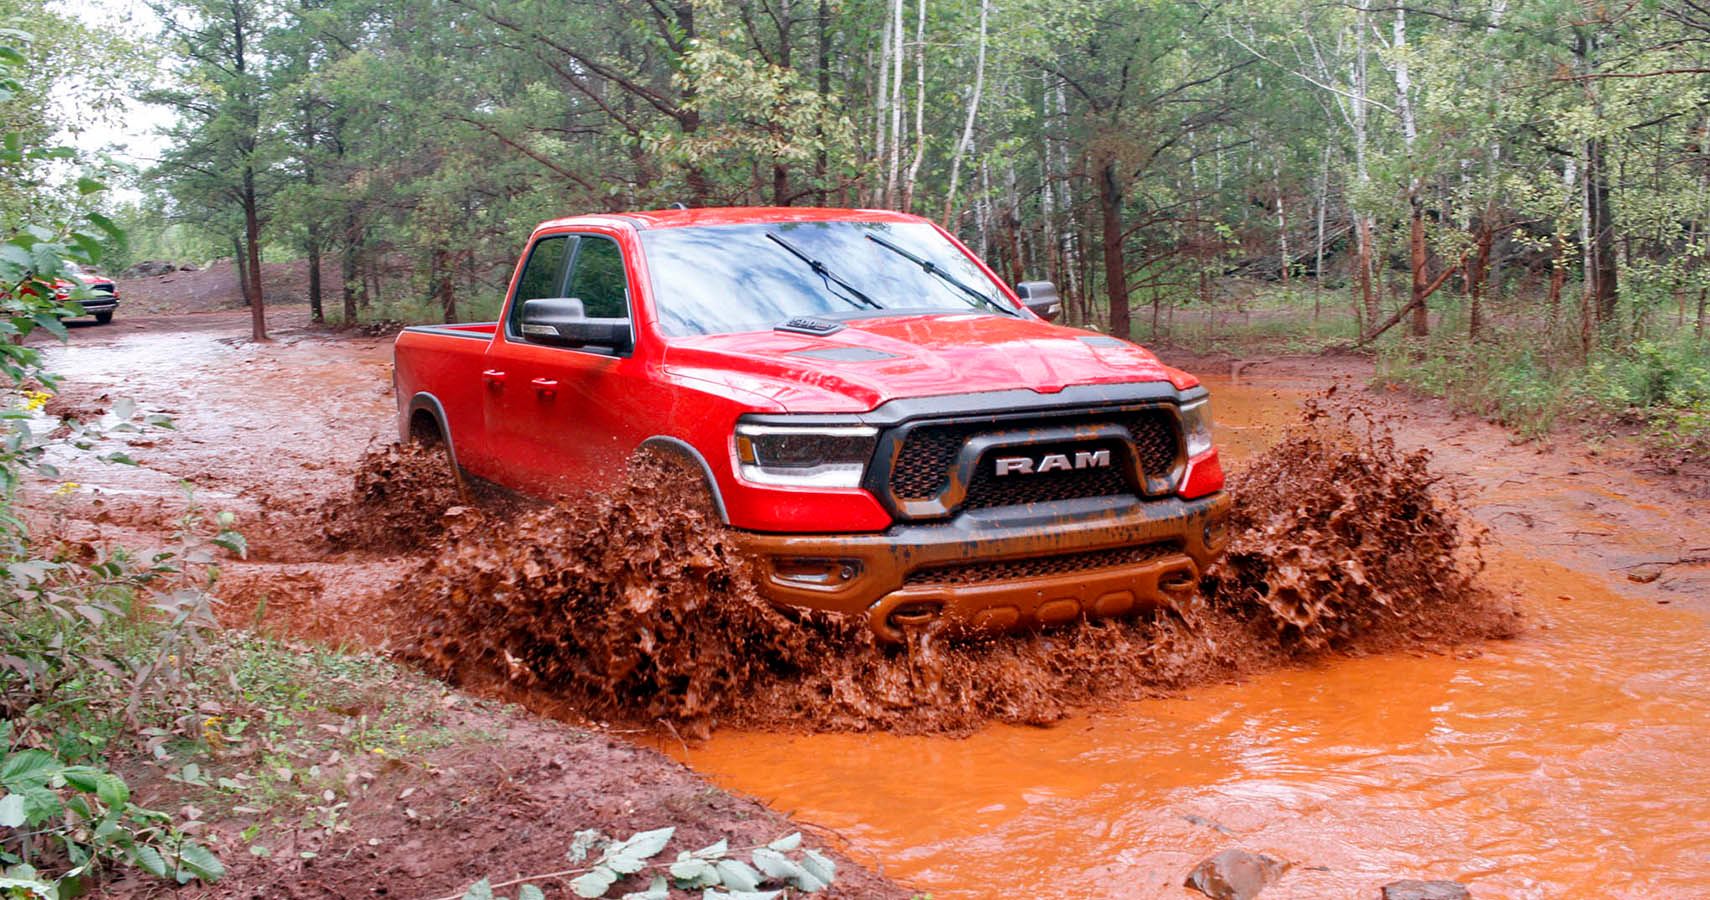 These Are The 10 Most Competent Pickup Trucks For Off-Roading In 2021